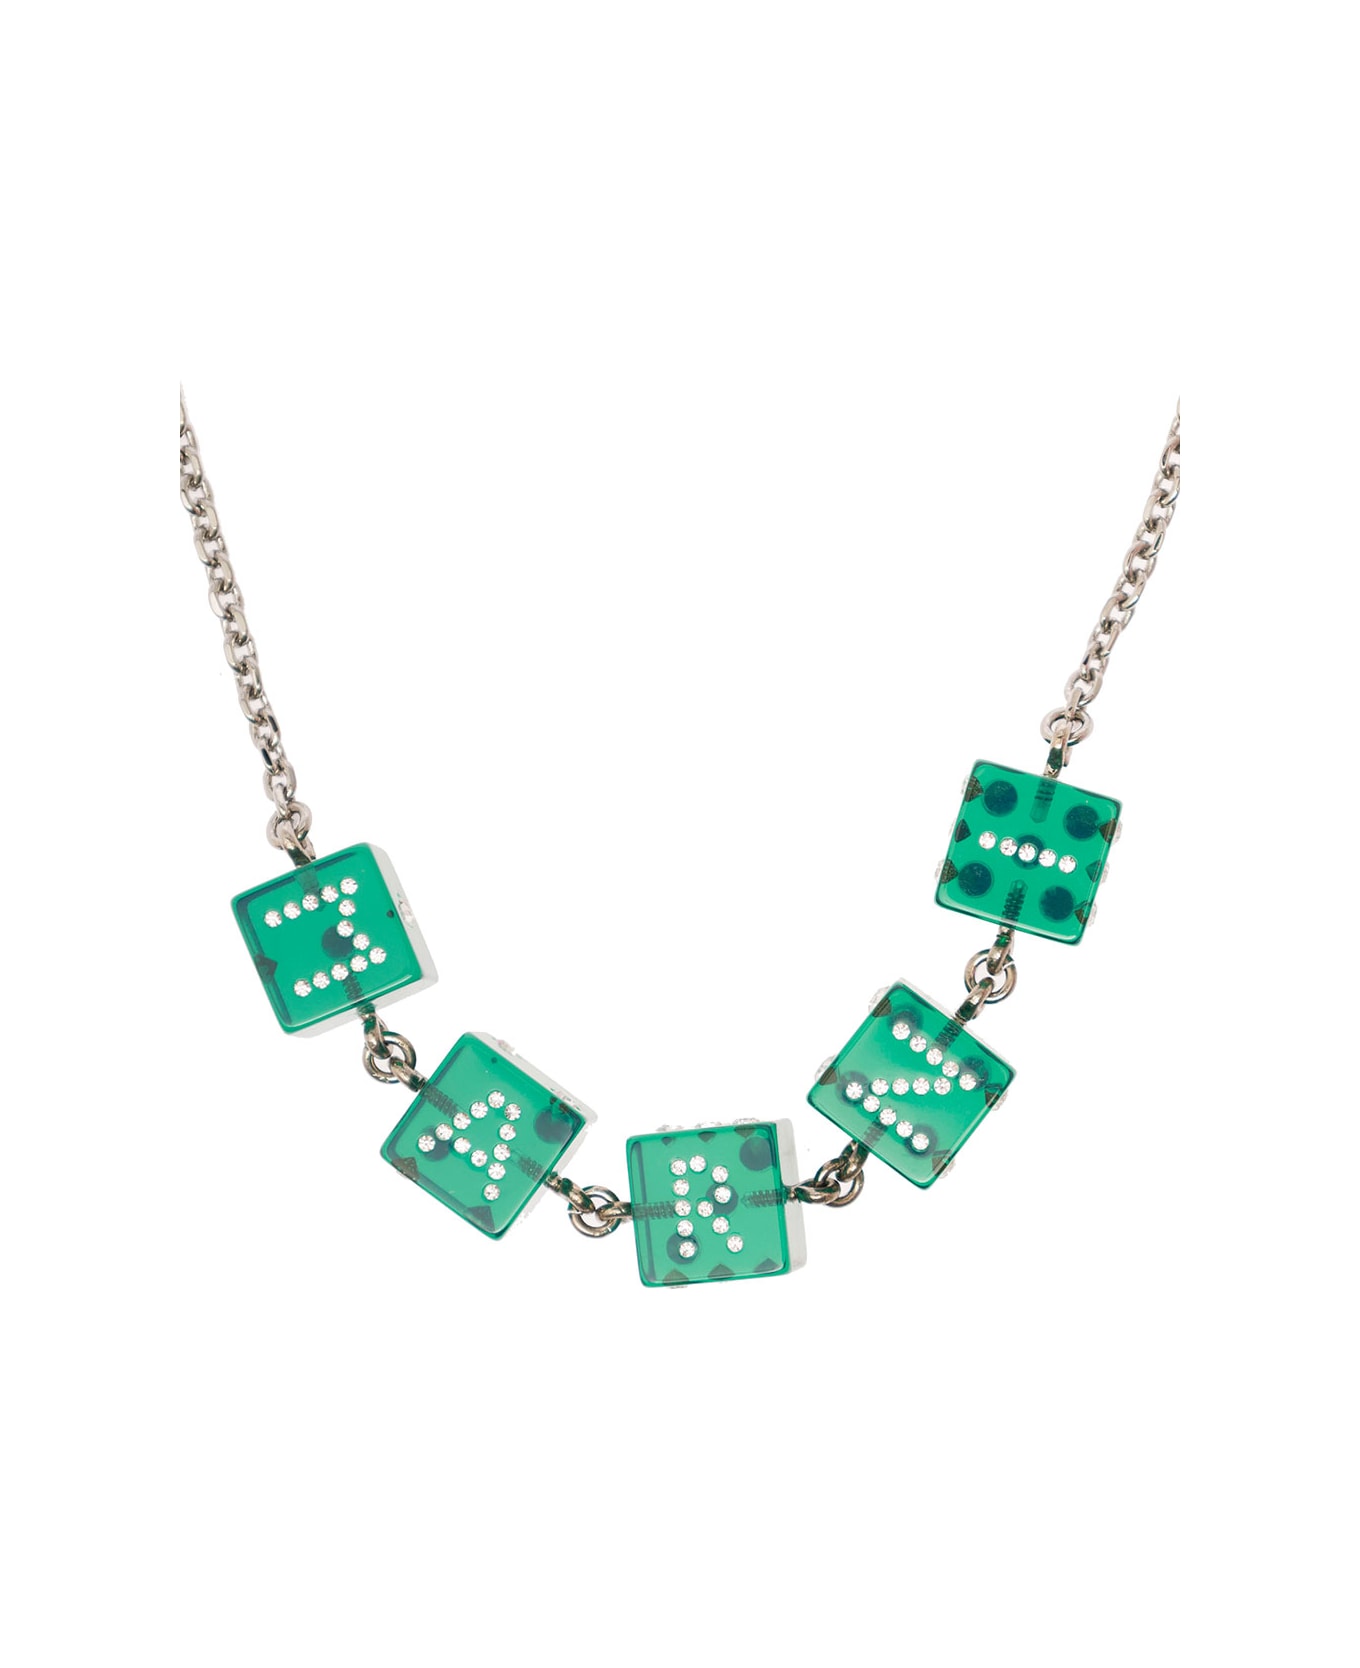 Marni Chain Necklace With Branded Dice-shaped Charms In Green Transparent Resin Woman - Green